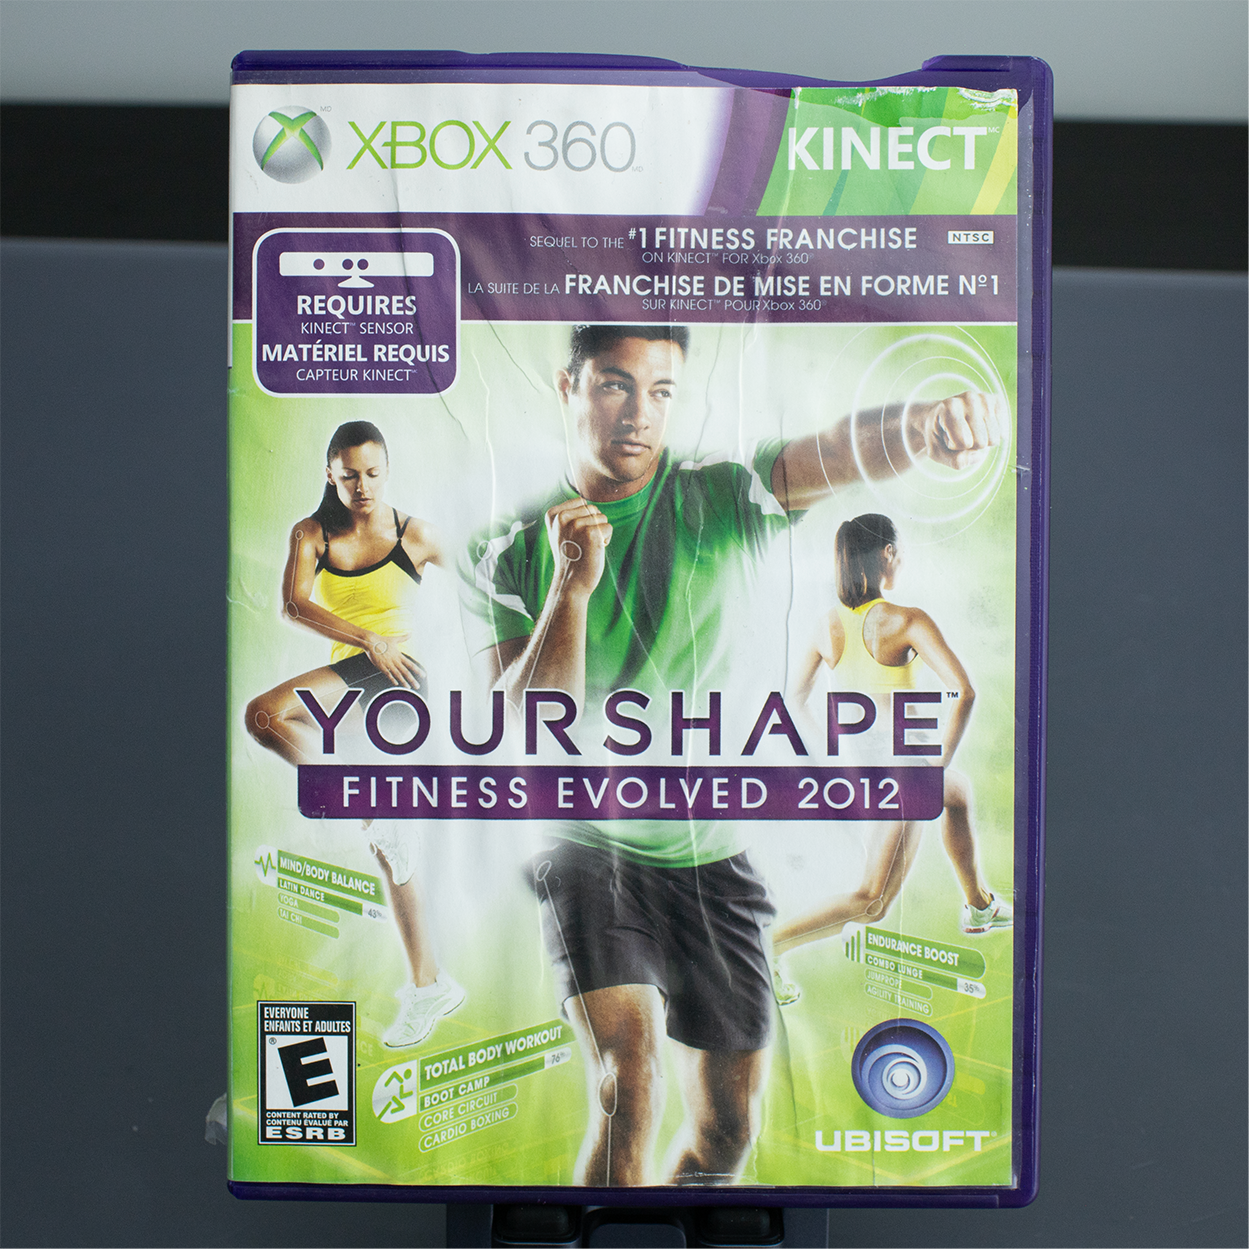 Your Shape - Fitness Evolved 2012 - Xbox 360 Game